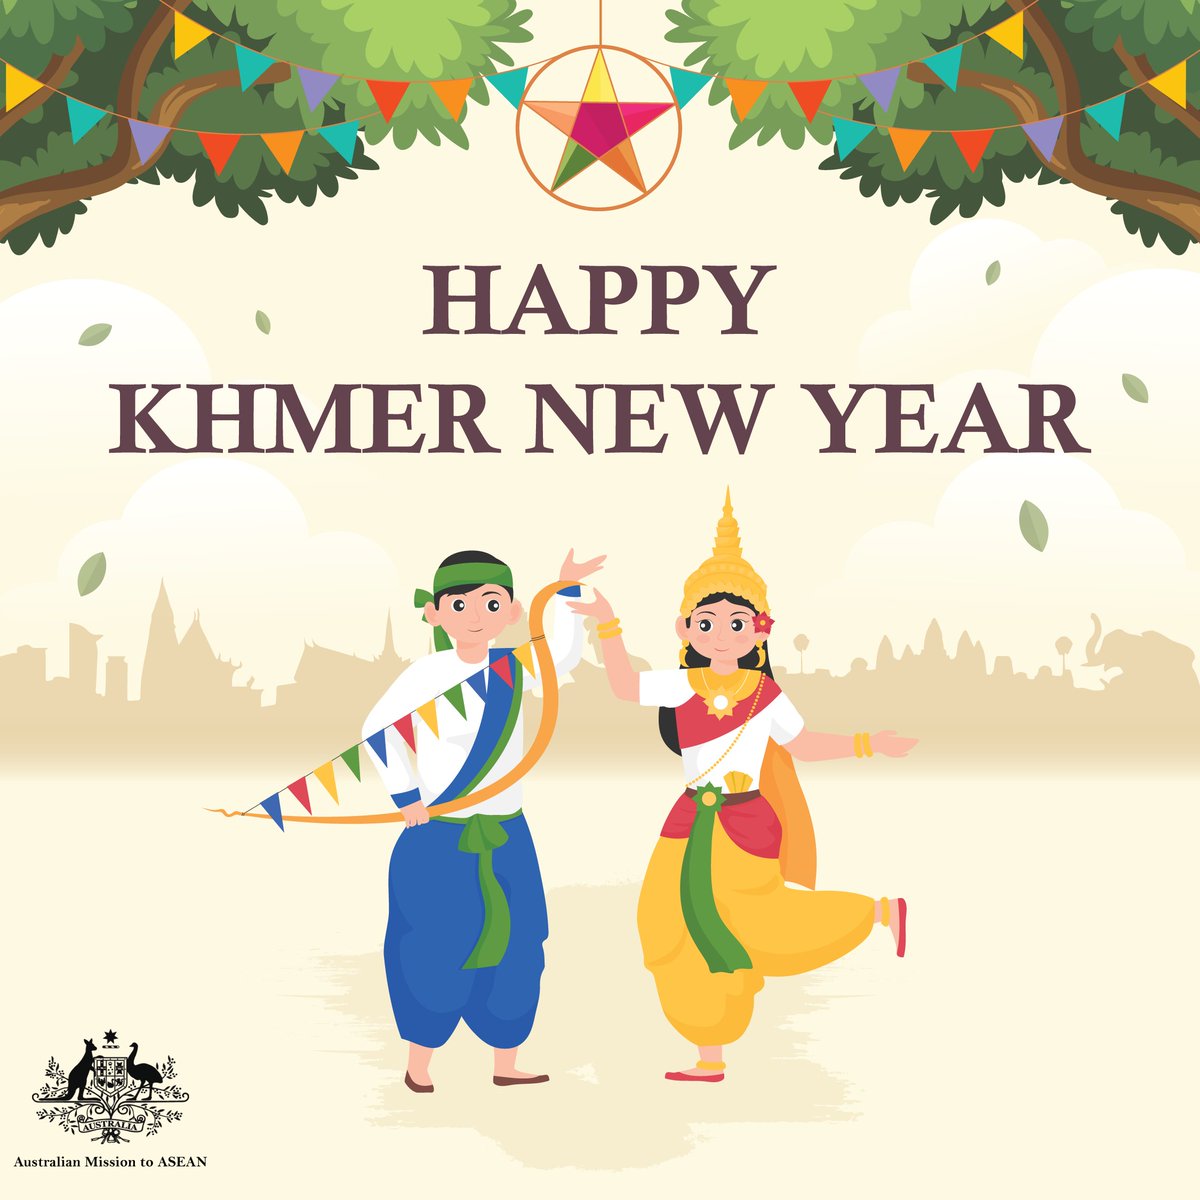 🎉 Happy Khmer New Year to all our Cambodian 🇰🇭 colleagues and friends! Wishing you a year filled with joy and success. Sursedey Chnam Thmey 🙏 #KhmerNewYear